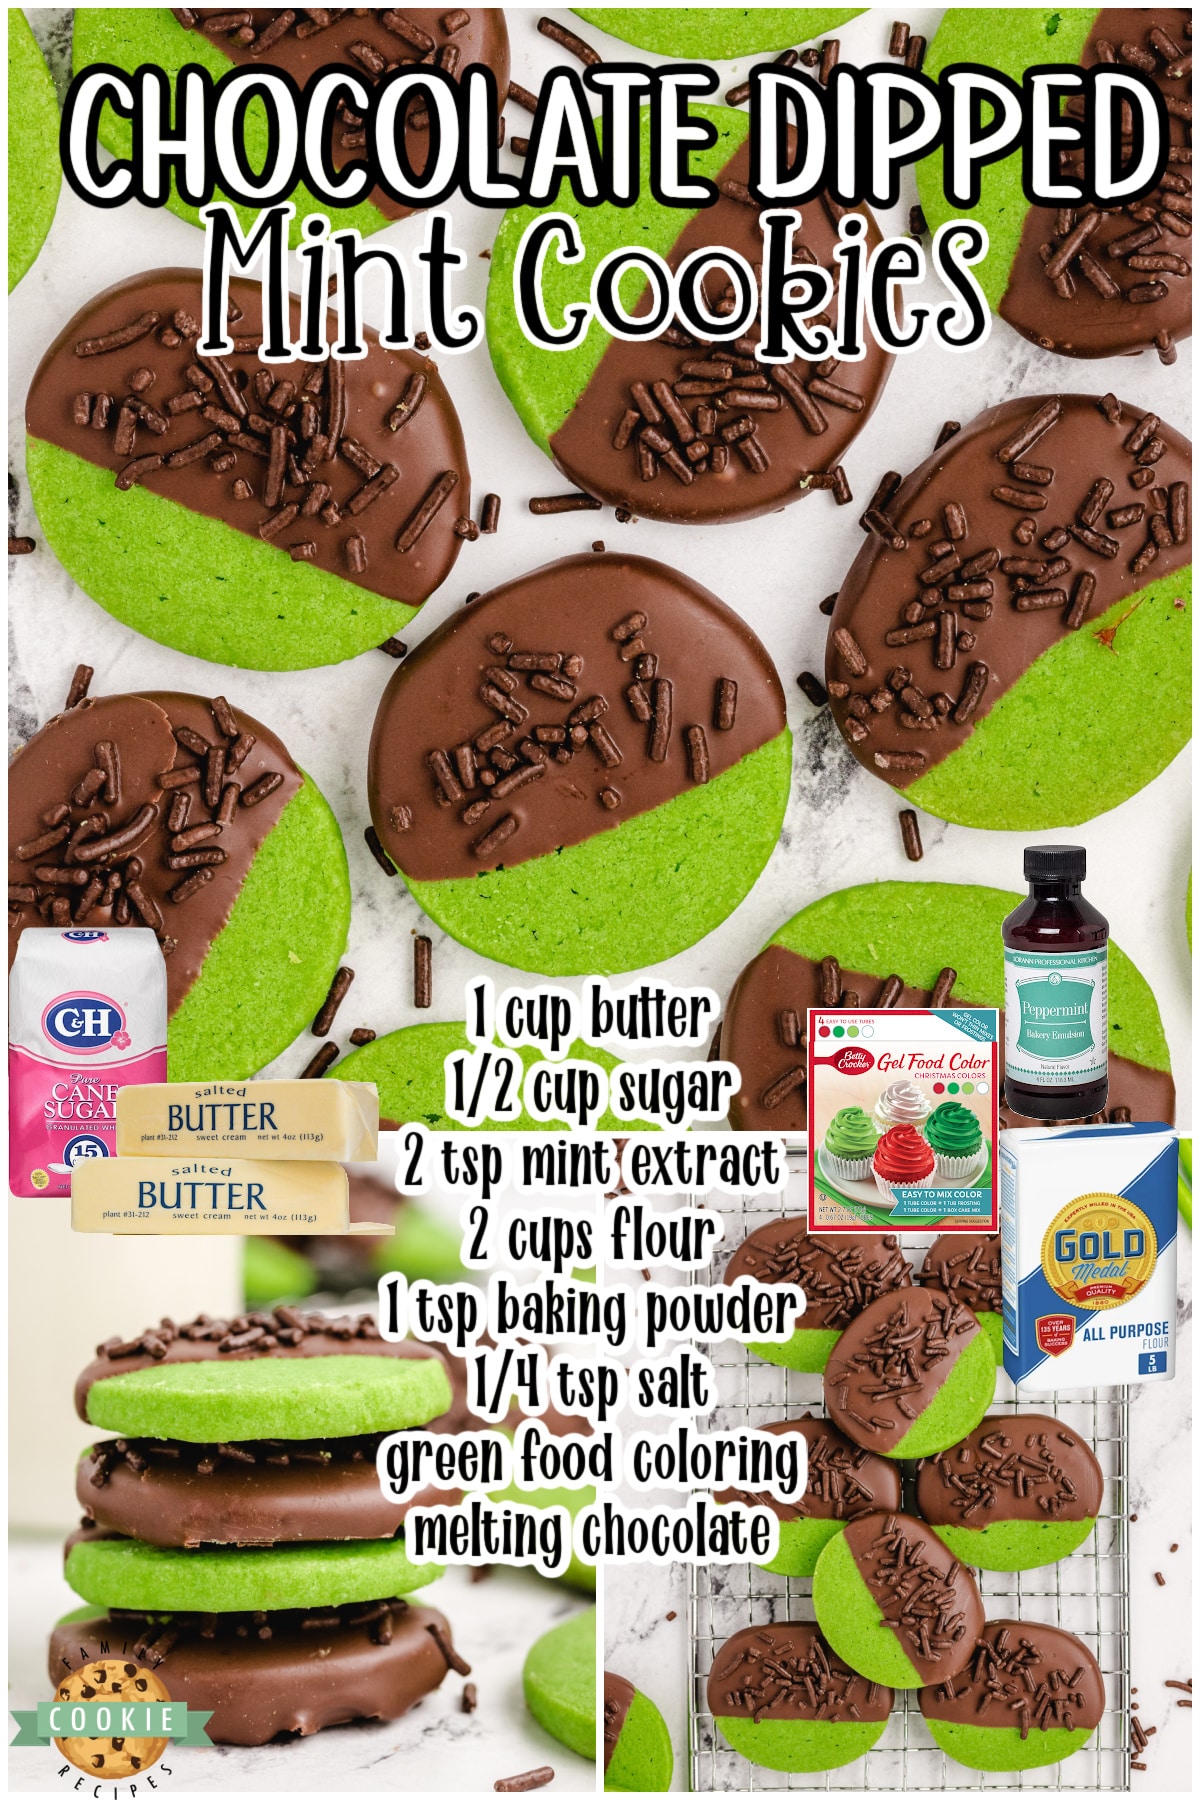 Mint Chocolate Cookies made from a buttery shortbread cookie dipped in chocolate & topped with chocolate sprinkles. Green Mint Cookies perfect for St. Patrick's Day!